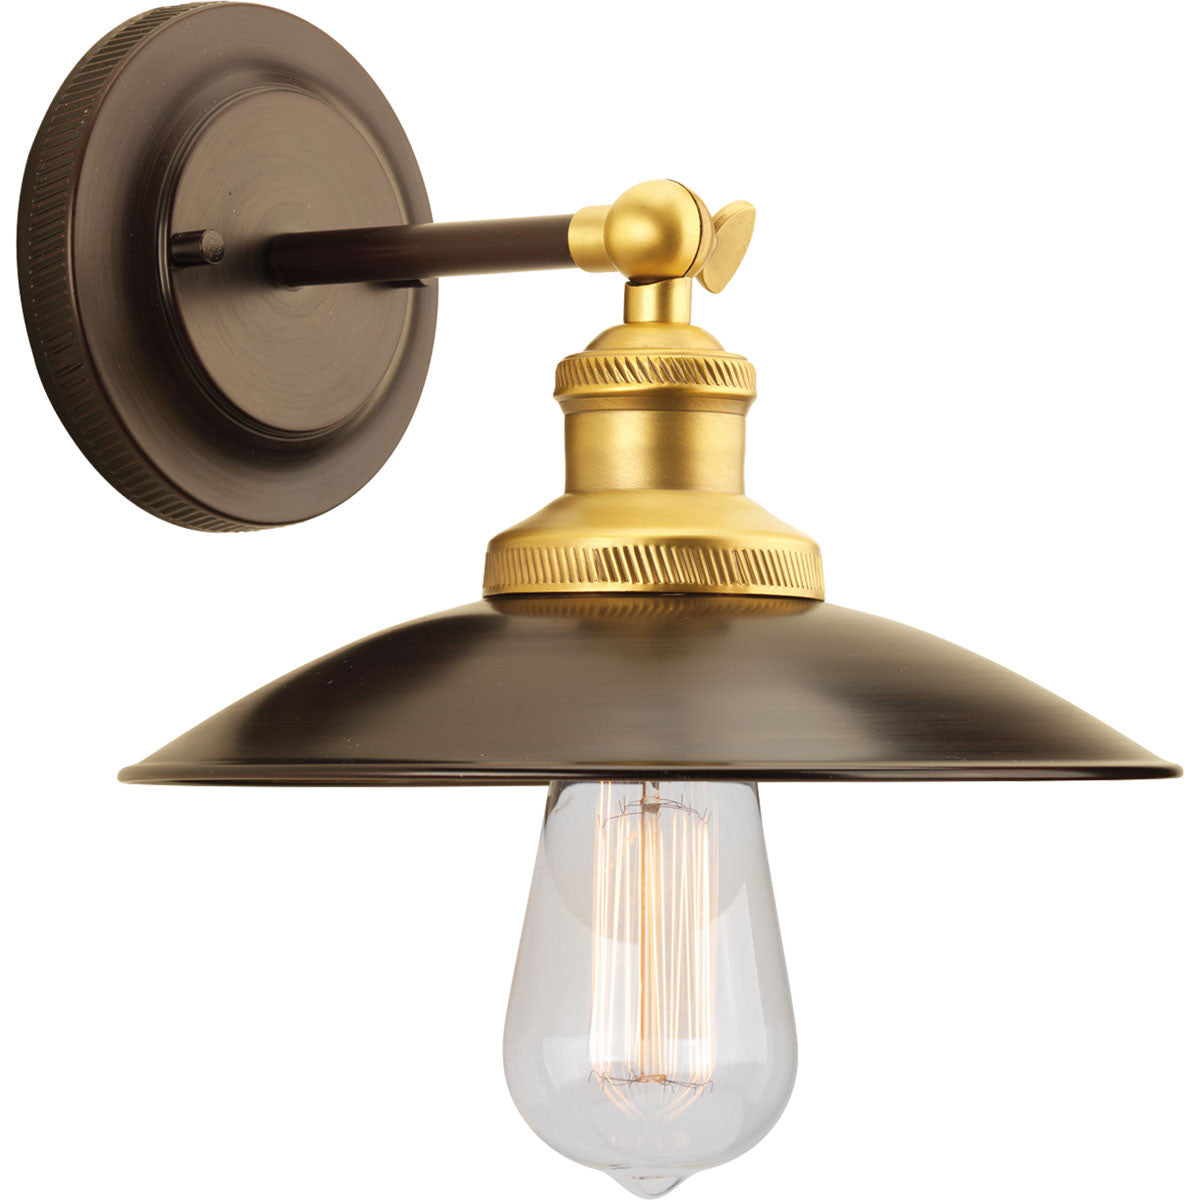 Archives Wall Sconce in Antique Bronze with Satin Brass Accents by Progress Lighting P7156-20